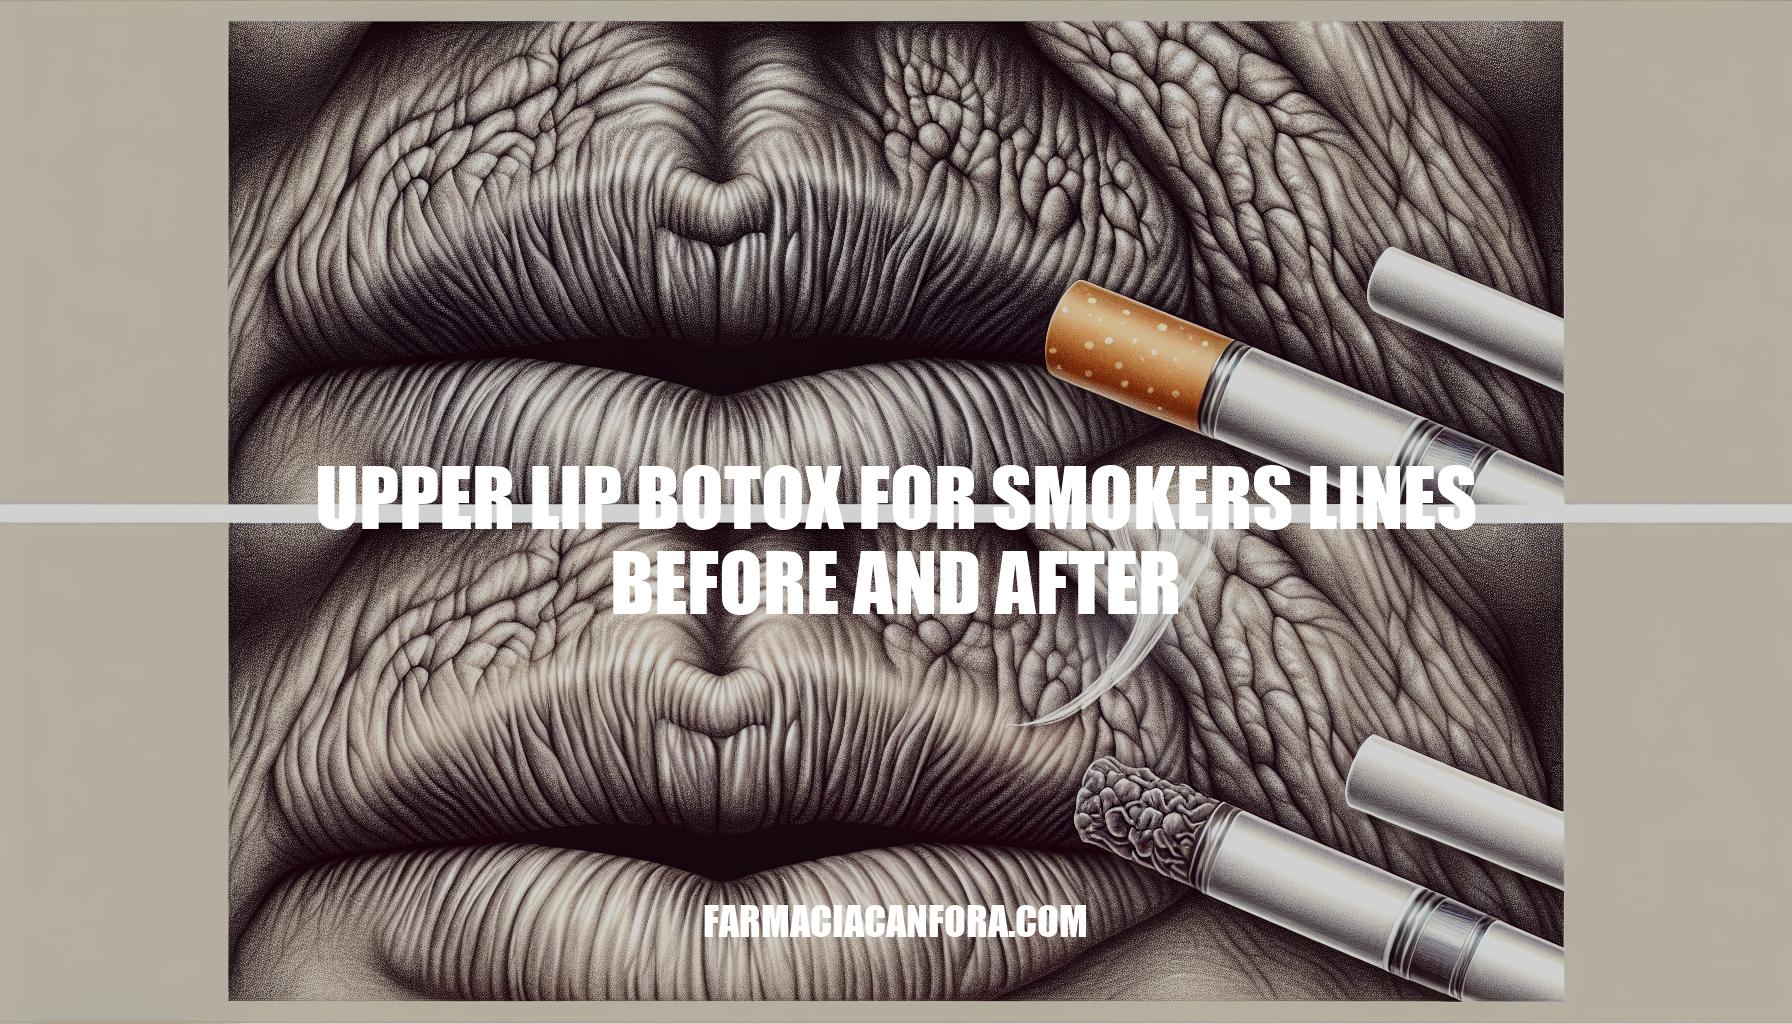 Upper Lip Botox for Smokers Lines Before and After: Complete Guide